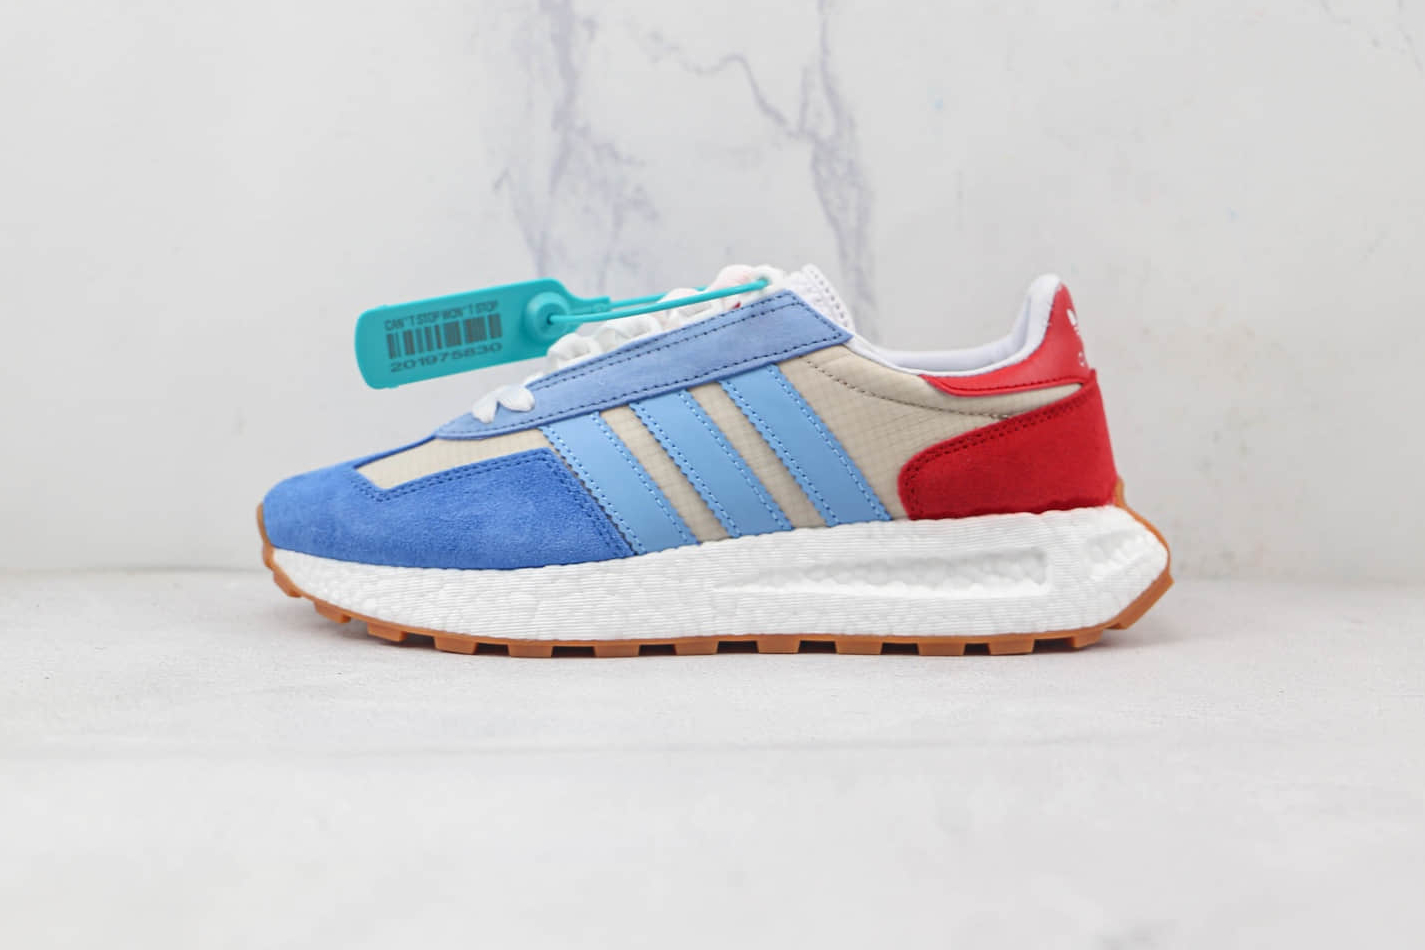 Adidas Retropy E5 Blue Red White - Retro-inspired Athletic Sneakers